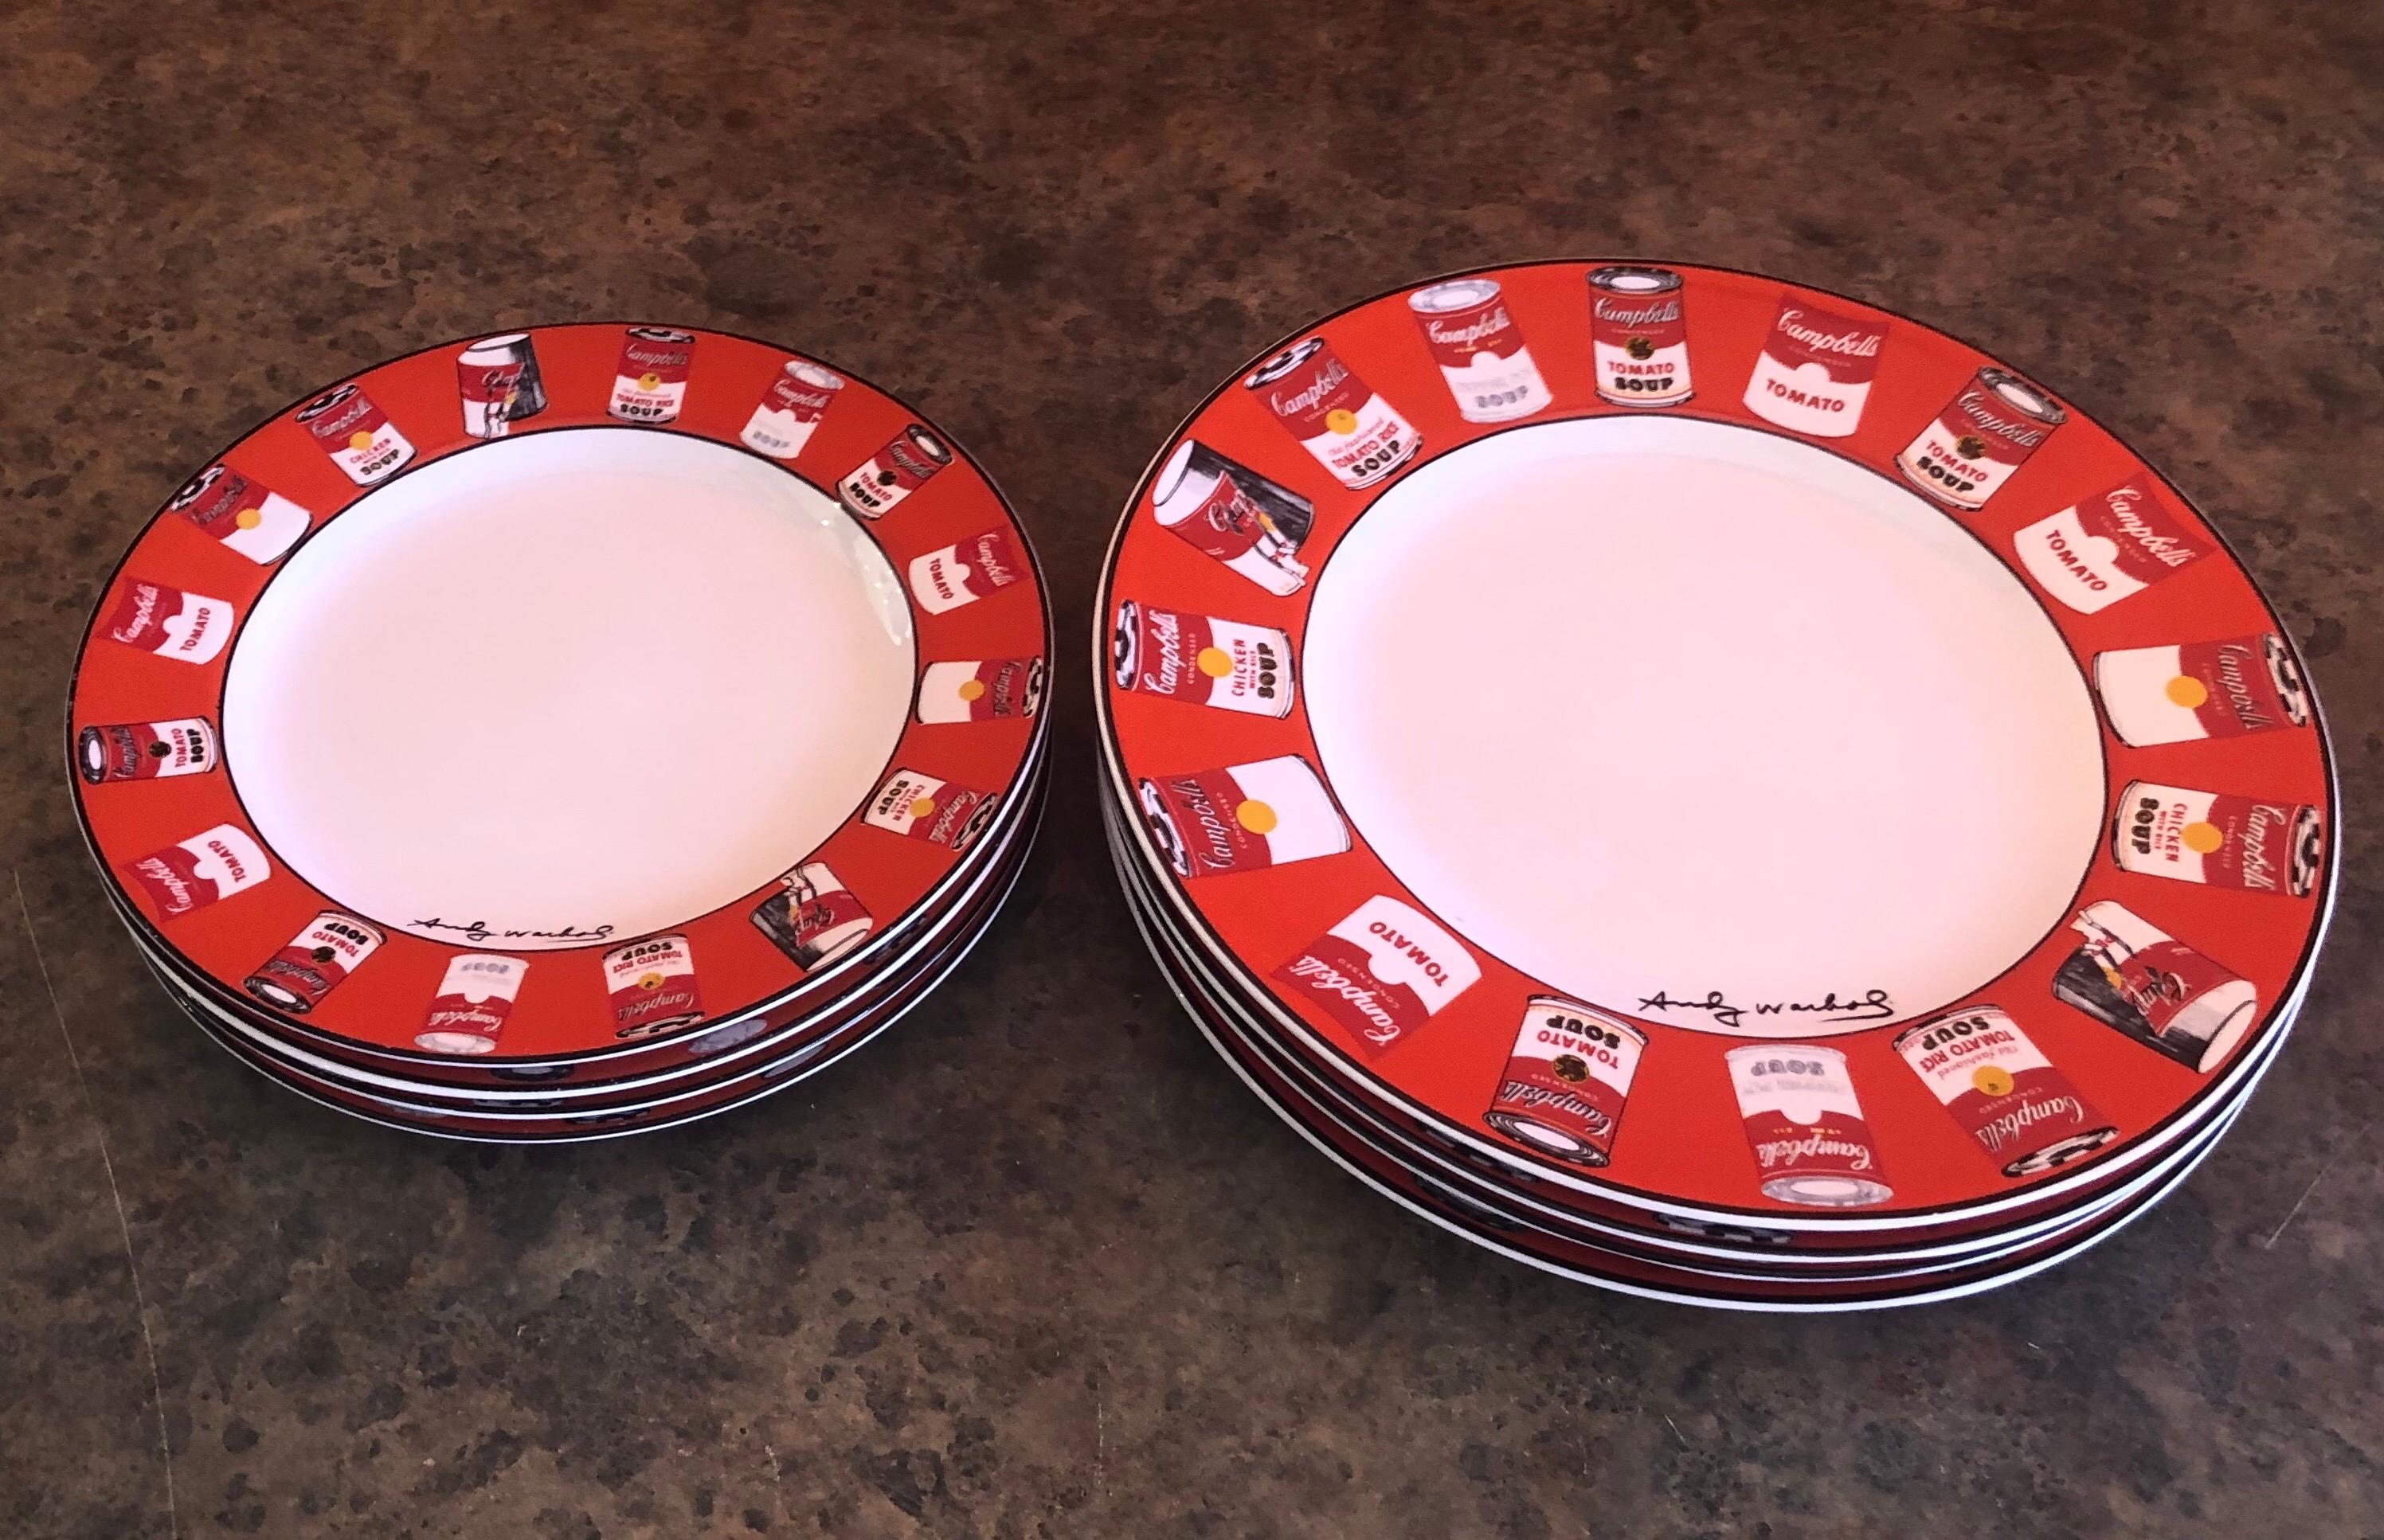 Fun set of four Cambell's soup salad and dinner plates by Andy Warhol for Block Art, circa 1990s. The set is in excellent condition with no chips or cracks. The dinner plate measures 10.5